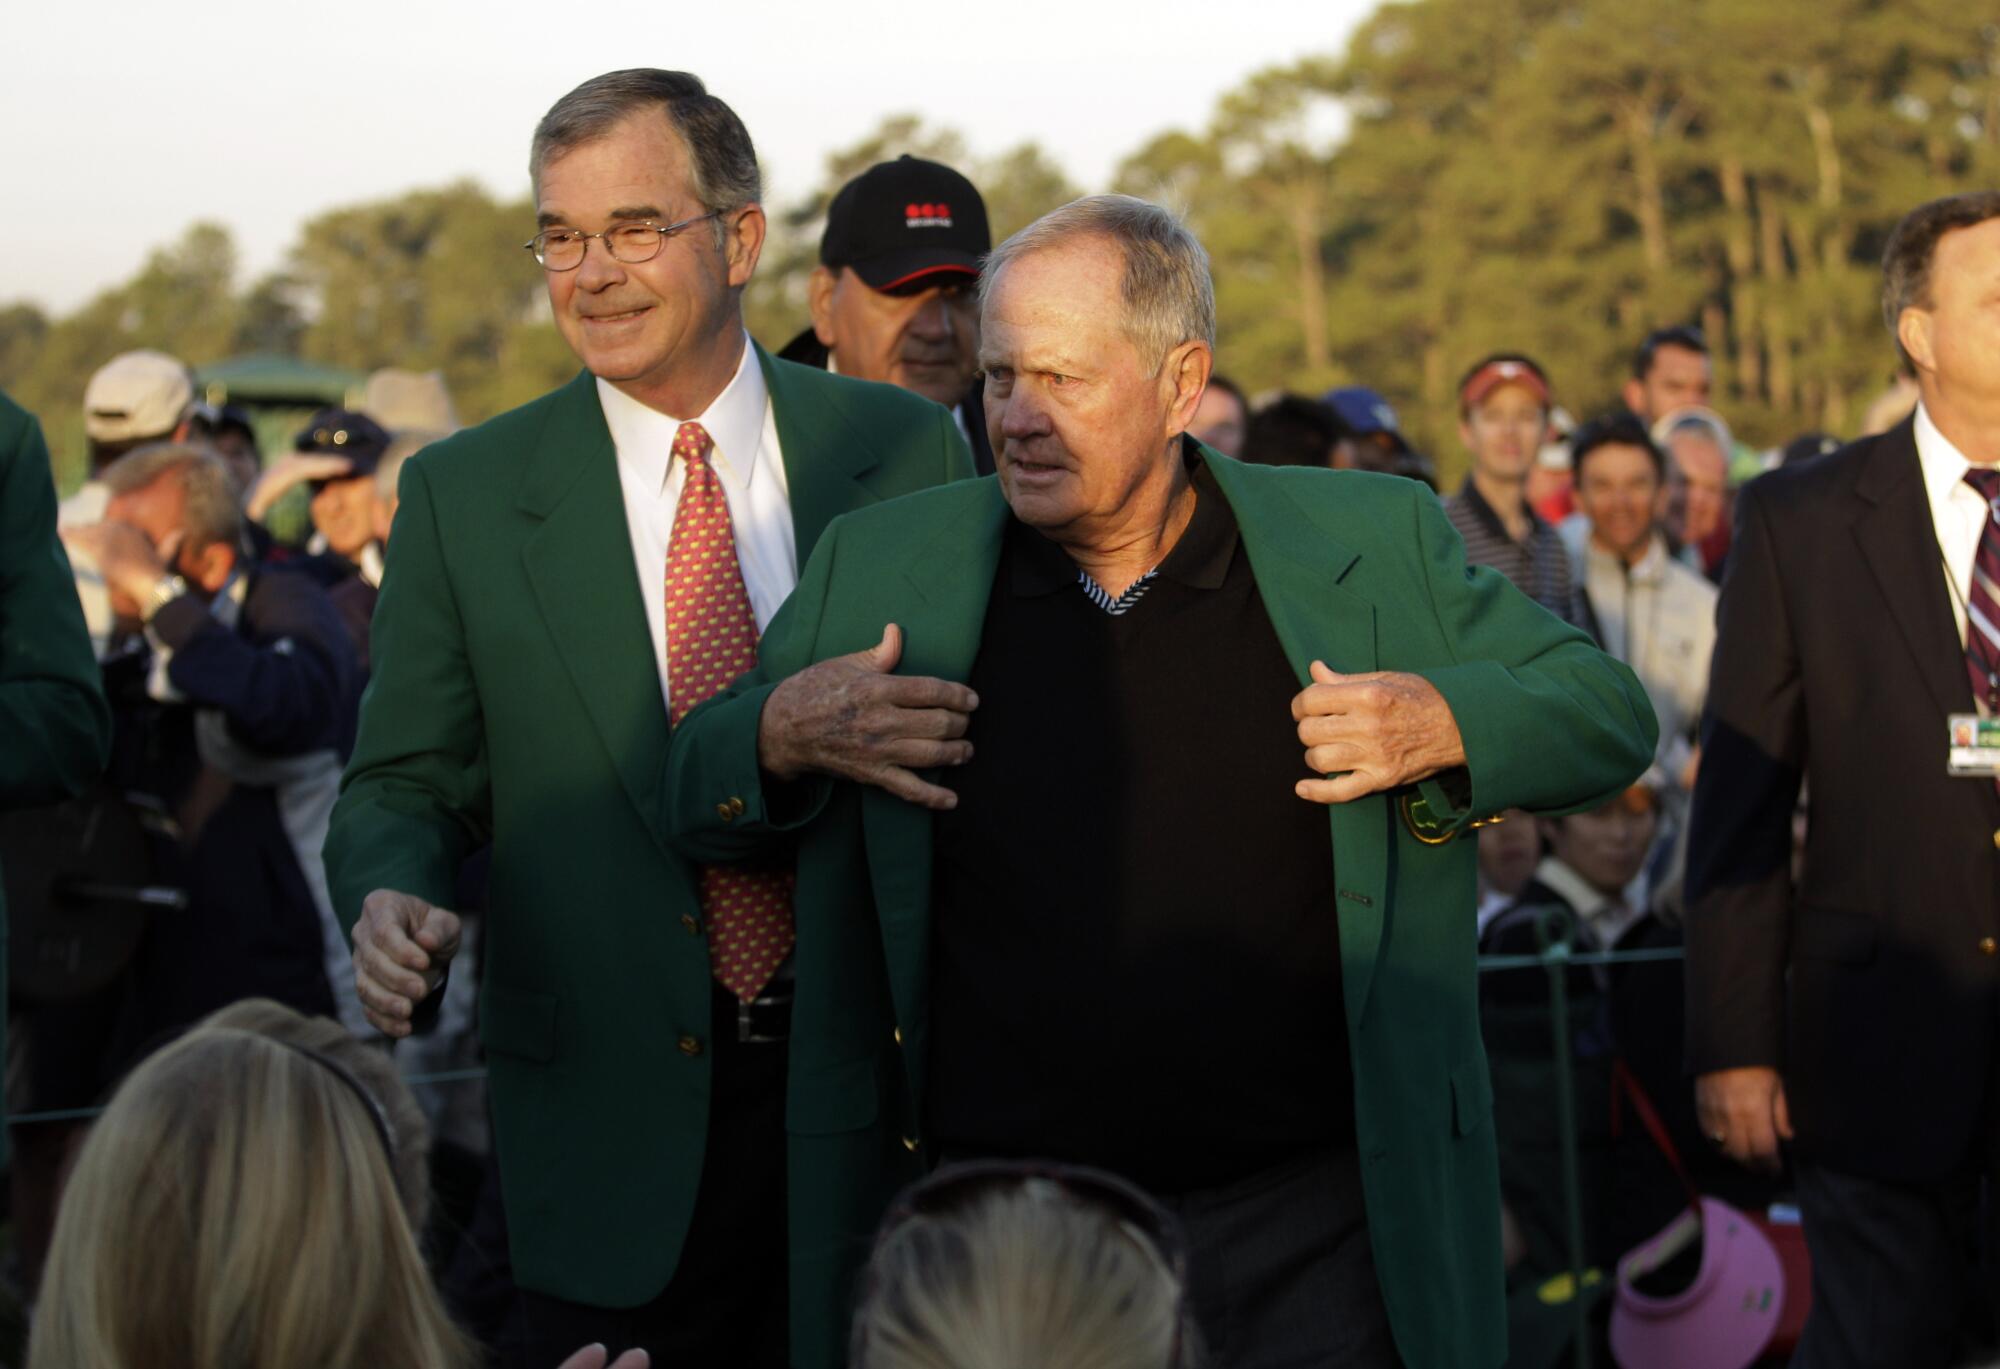 Jack Nicklaus, right, puts on his Masters green jacket in 2011 as Augusta National and Masters chairman Billy Payne watches.